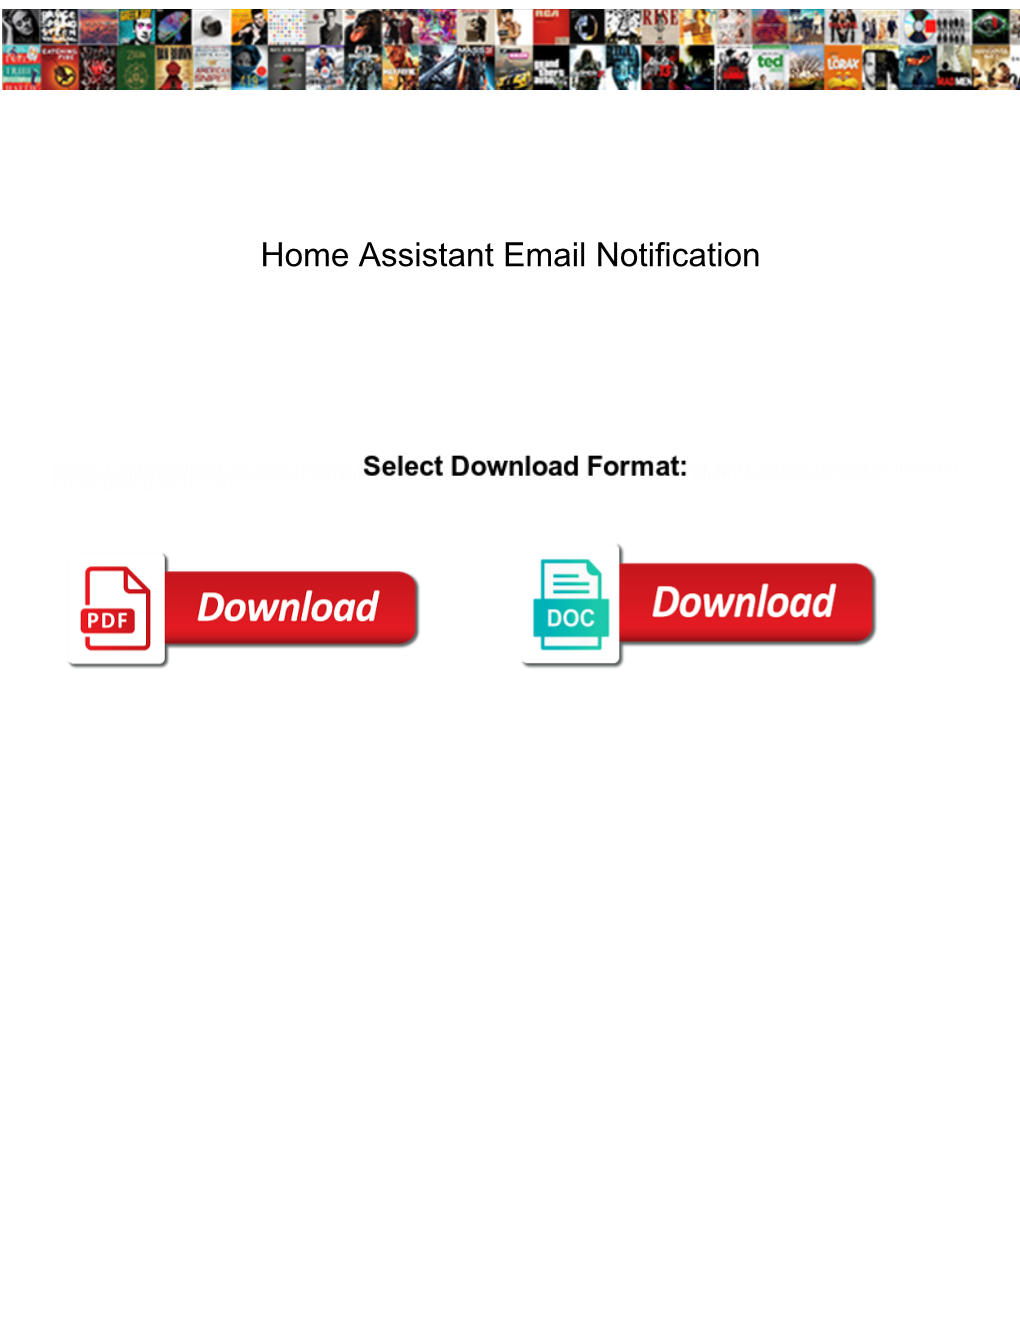 Home Assistant Email Notification